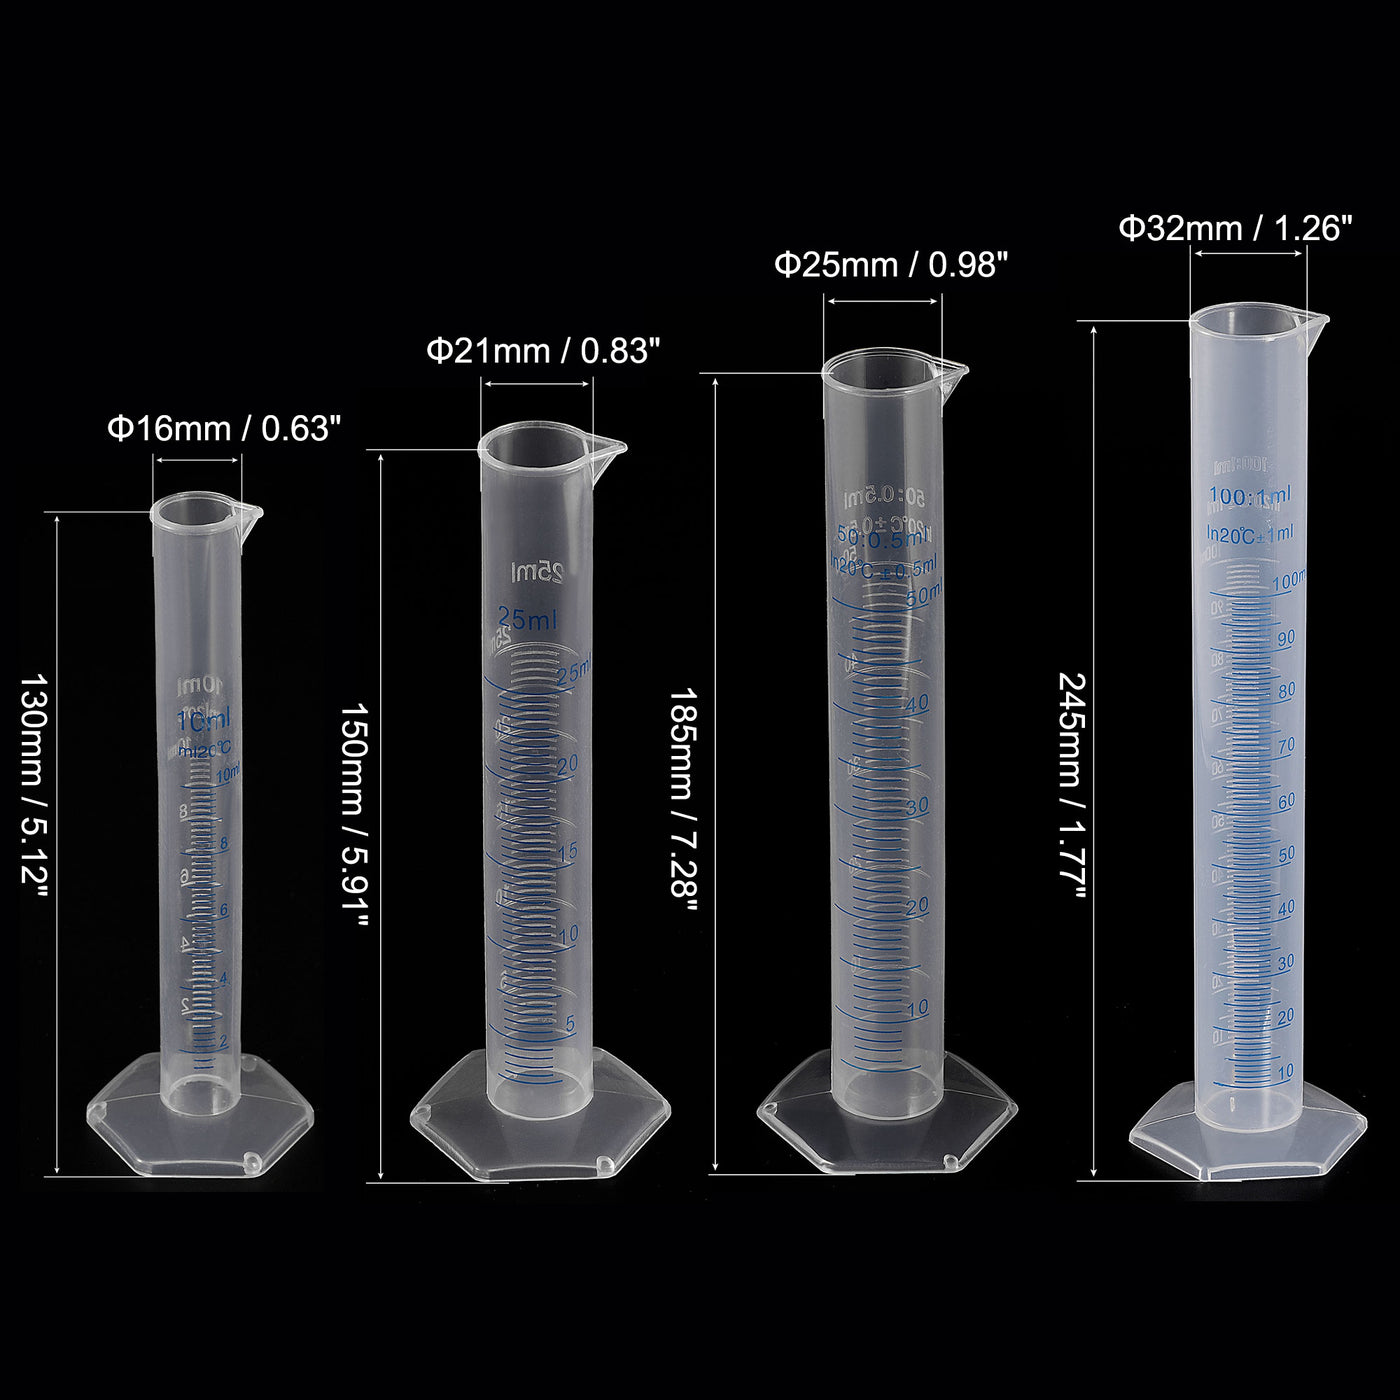 uxcell Uxcell Plastic Graduated Cylinder, 10ml 25ml 50ml 100ml Measuring Cylinder with 4 Transfer Pipettes and 2 Brushes, 10in1 Set for Science Lab